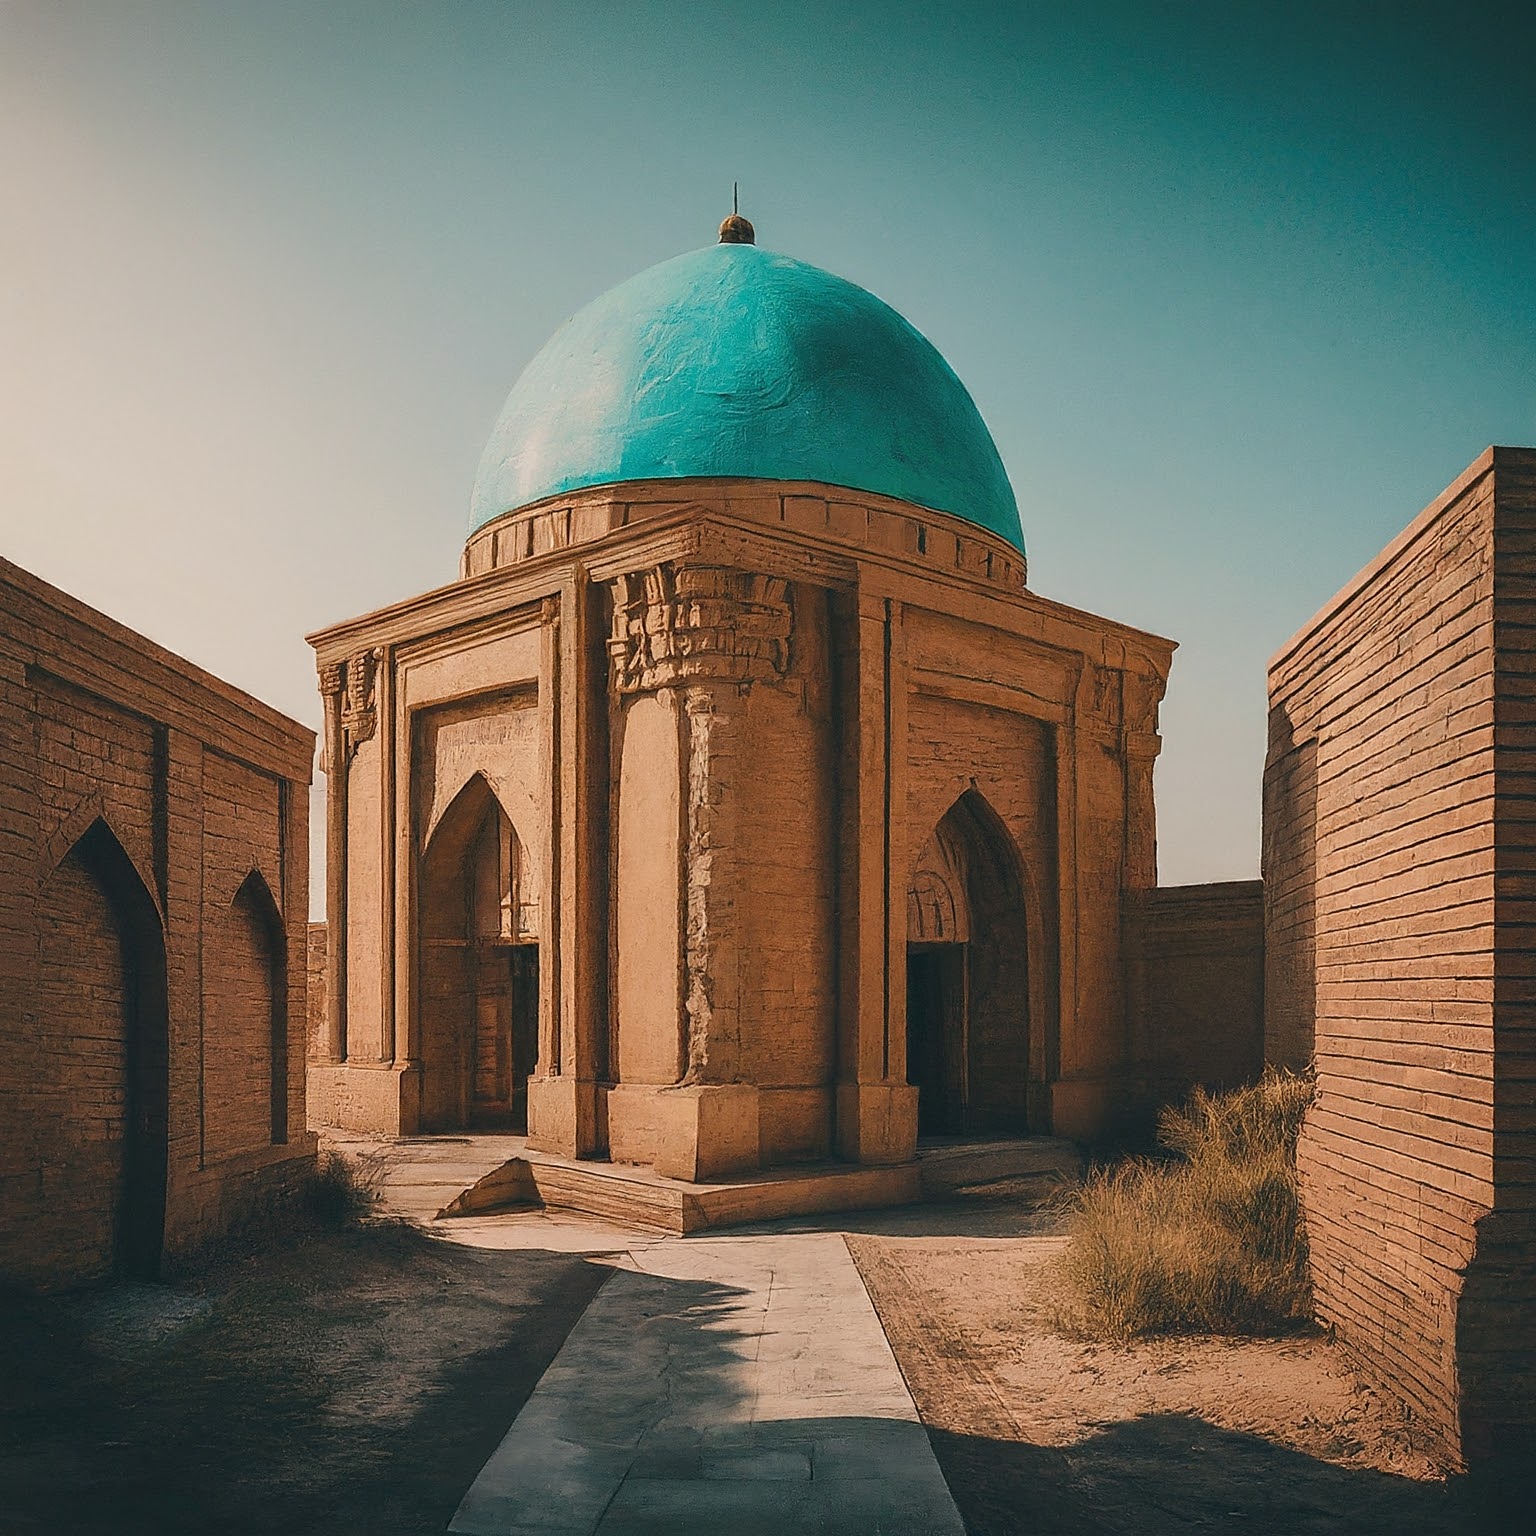 Sultan Tekesh Mausoleum in KonyeUrgench, Turkmenistan, with intricate brickwork and turquoise dome.